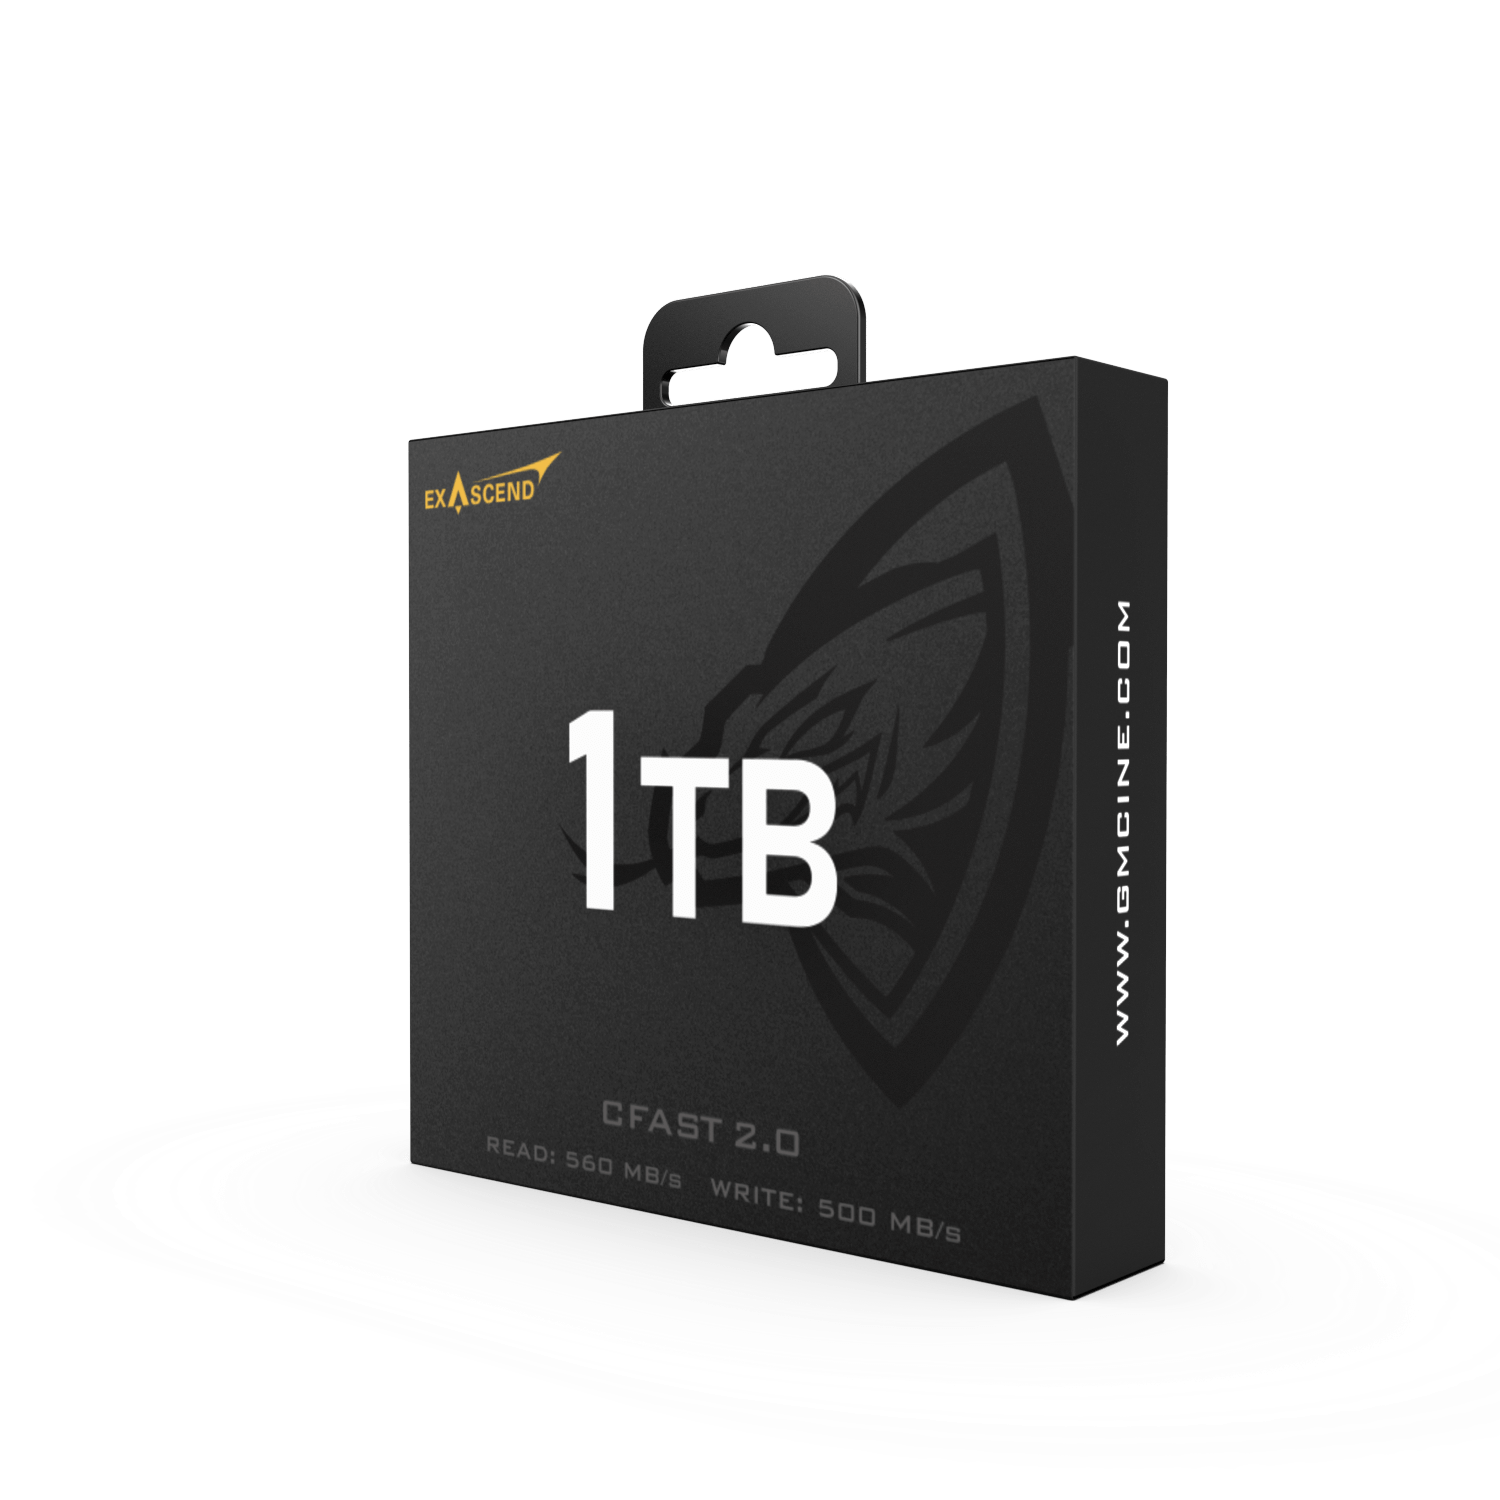 Exascend Archon 1TB Cfast 2.0 Memory Card